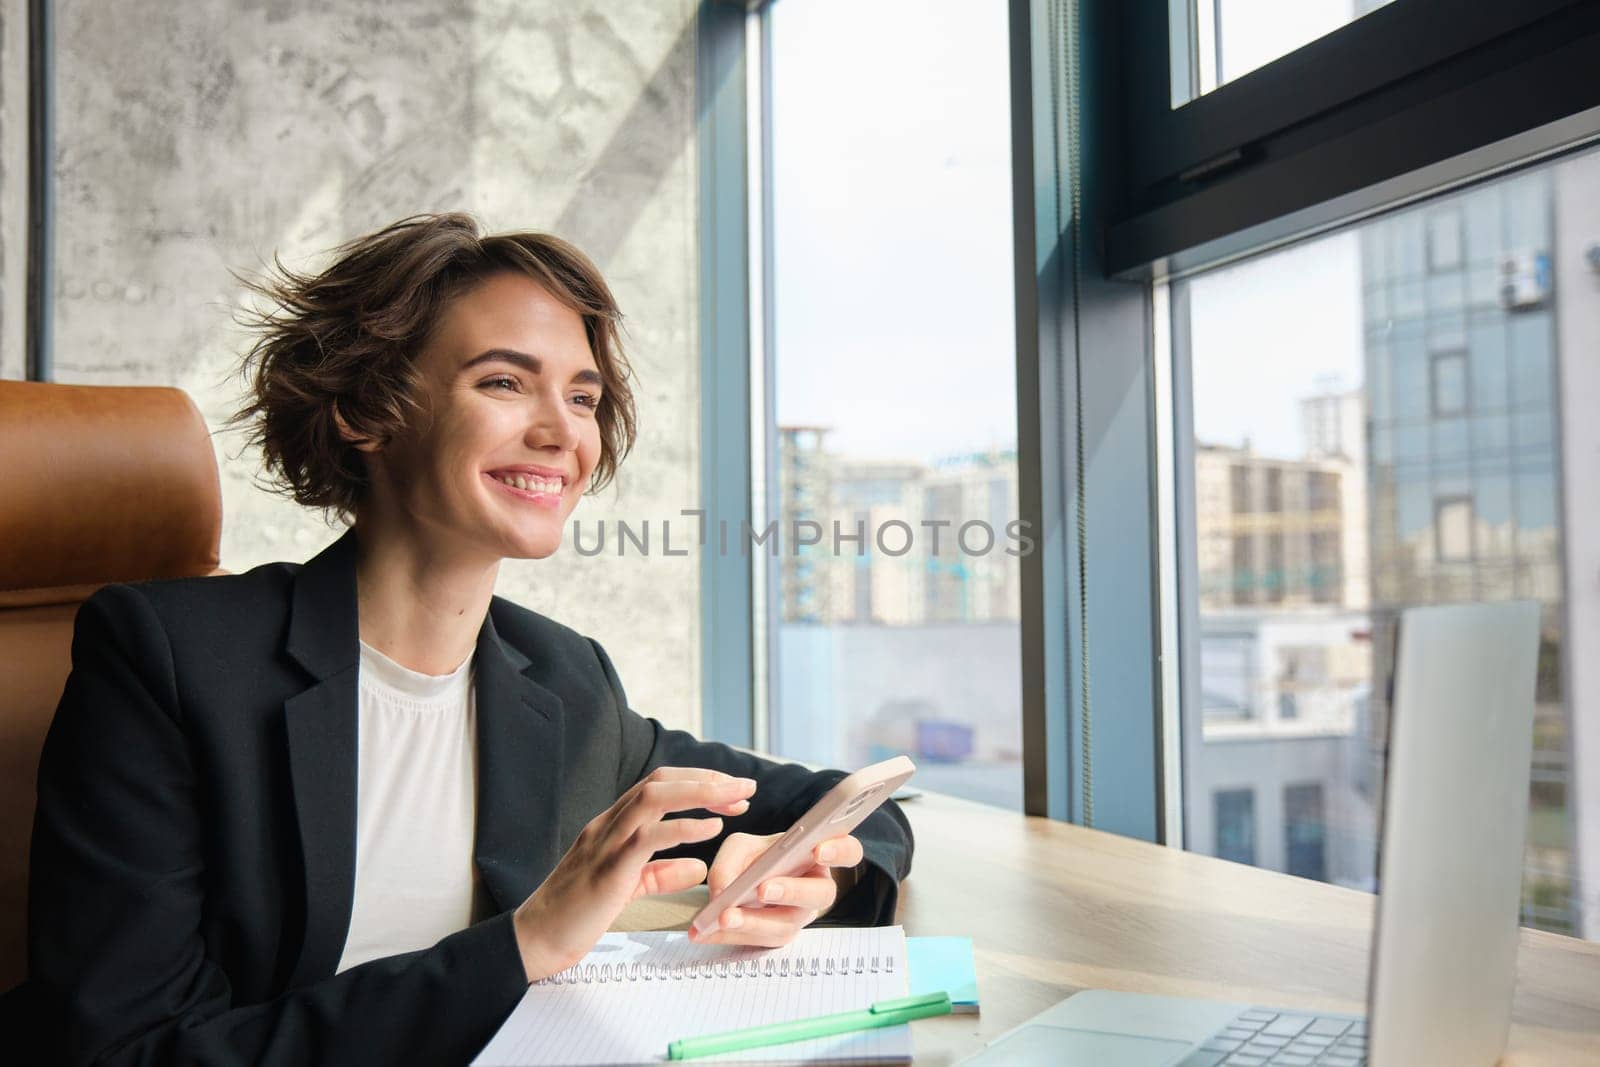 Portrait of businesswoman in suit, sitting in her office in front of window, having a chat on her mobile phone, suing smartphone, has her laptop and documents on table.